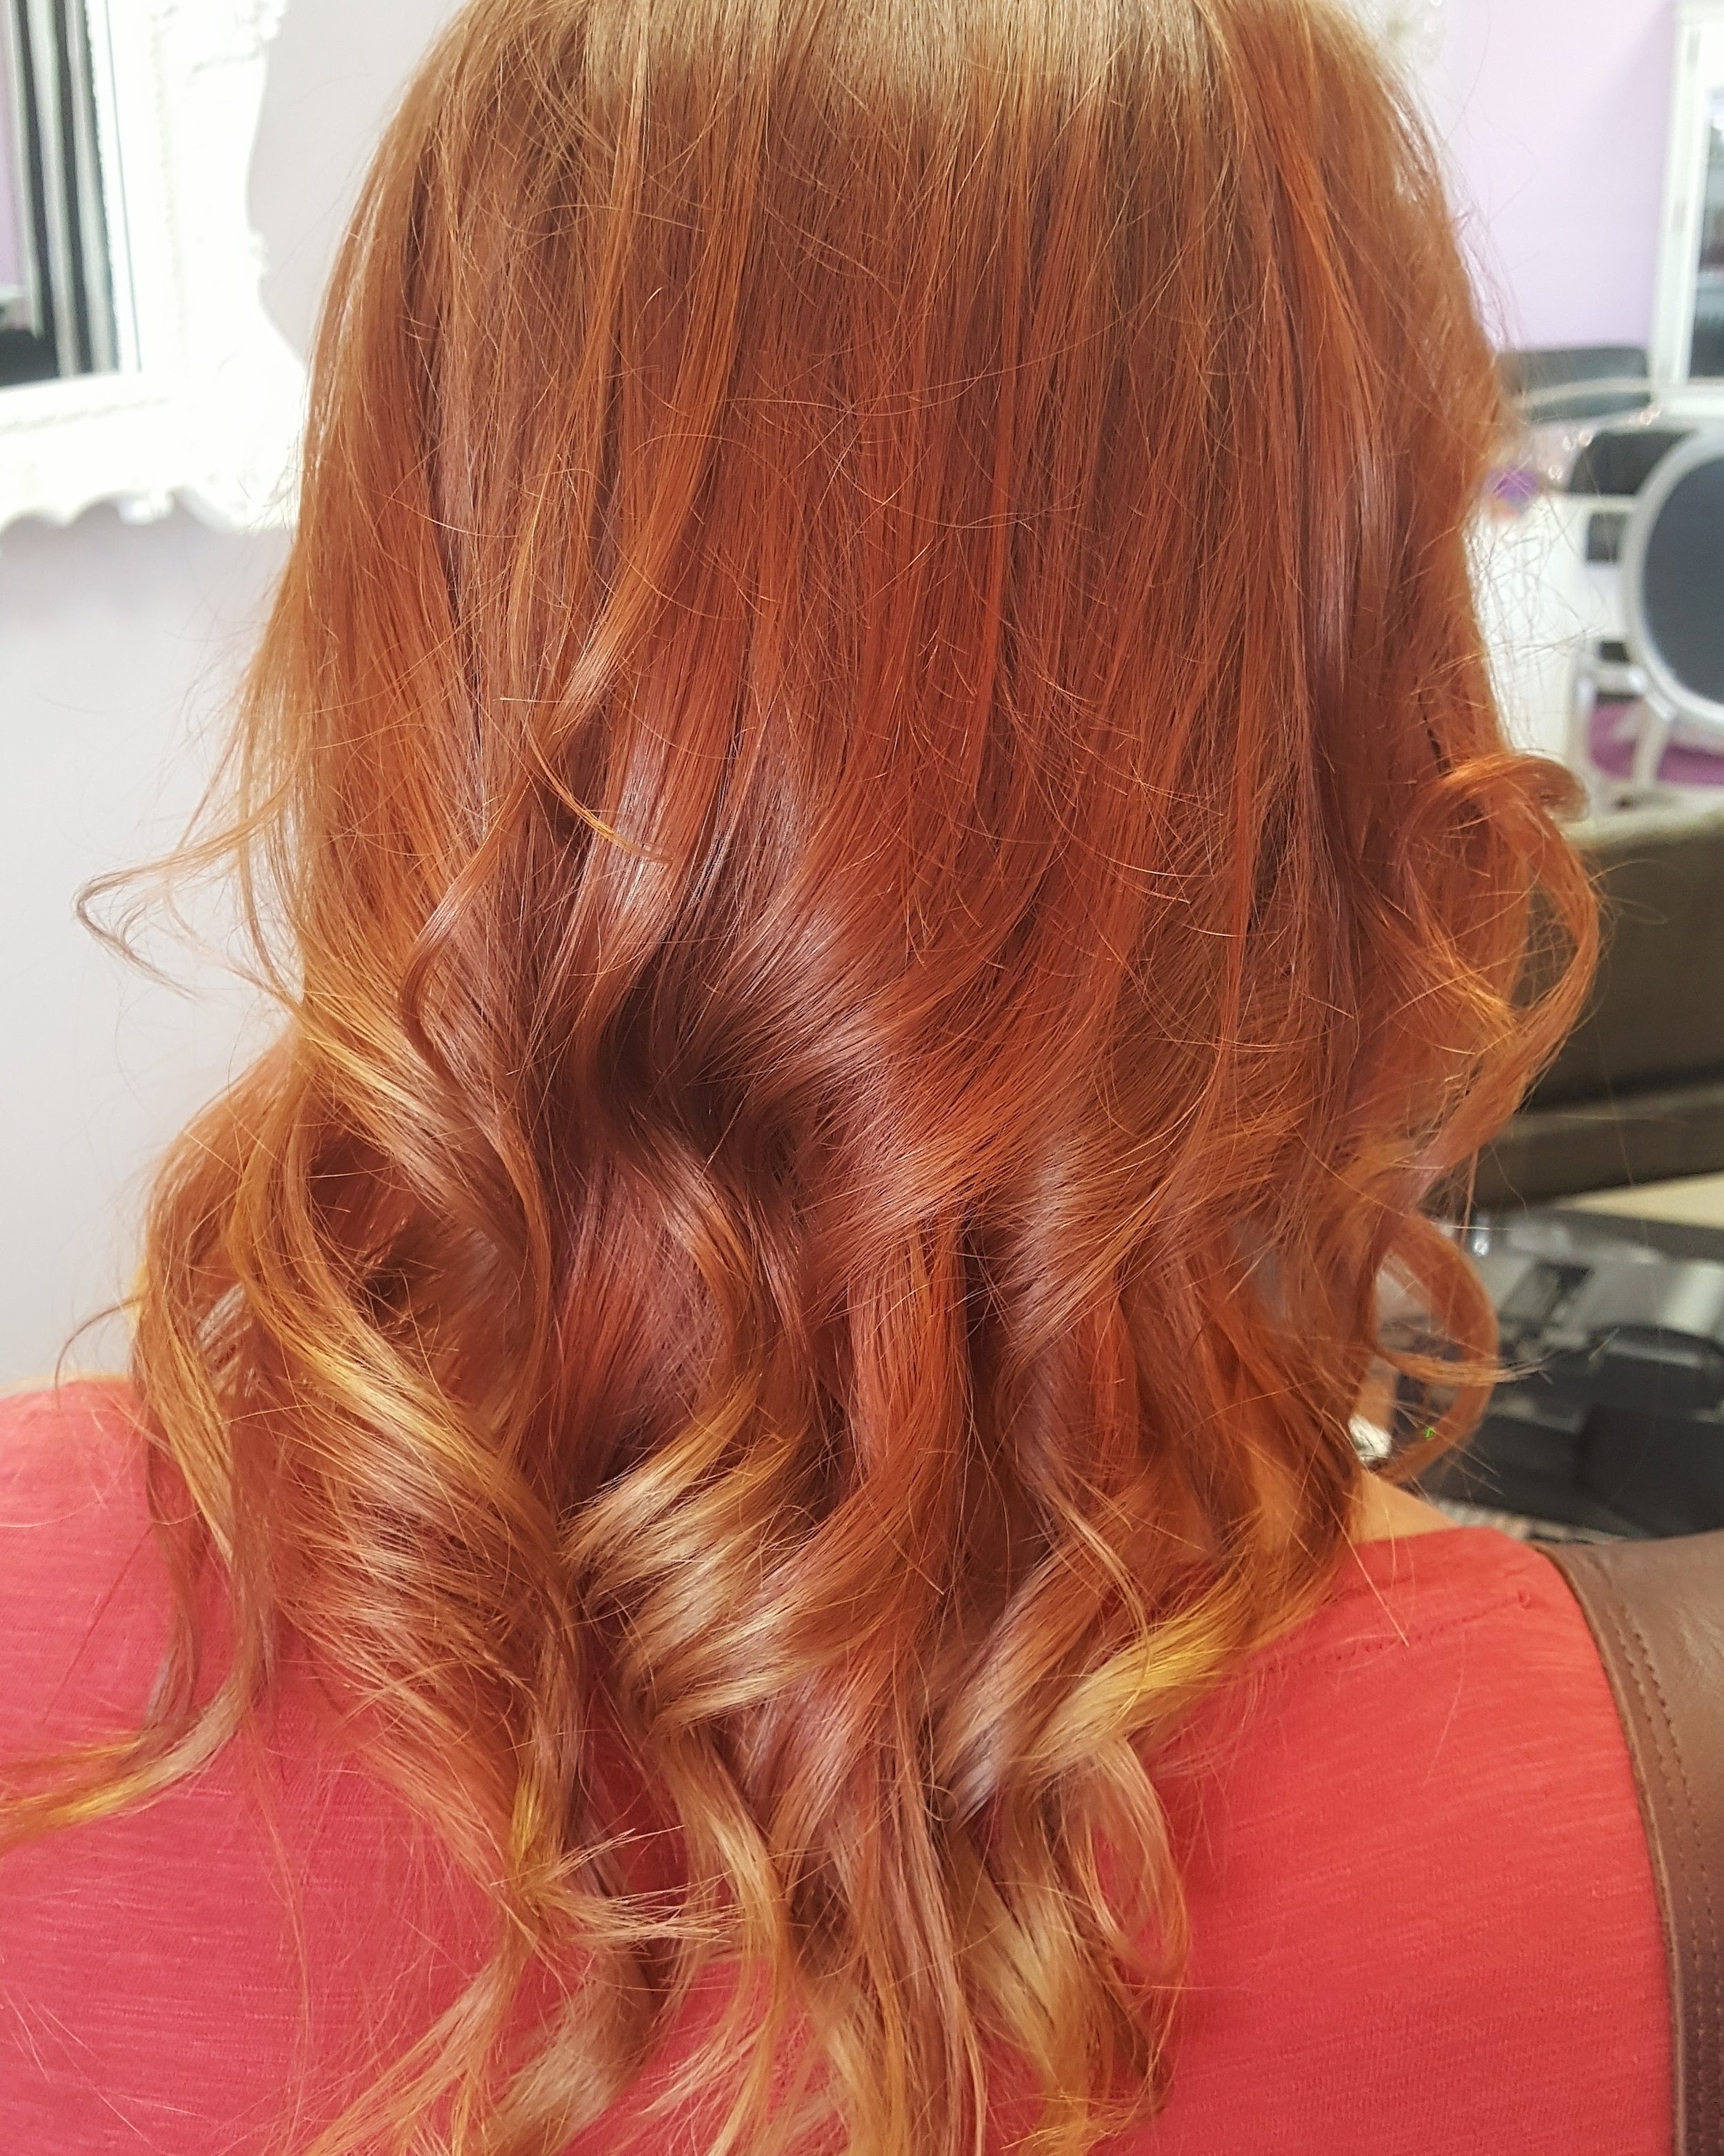 Intense Red/Copper with light ends